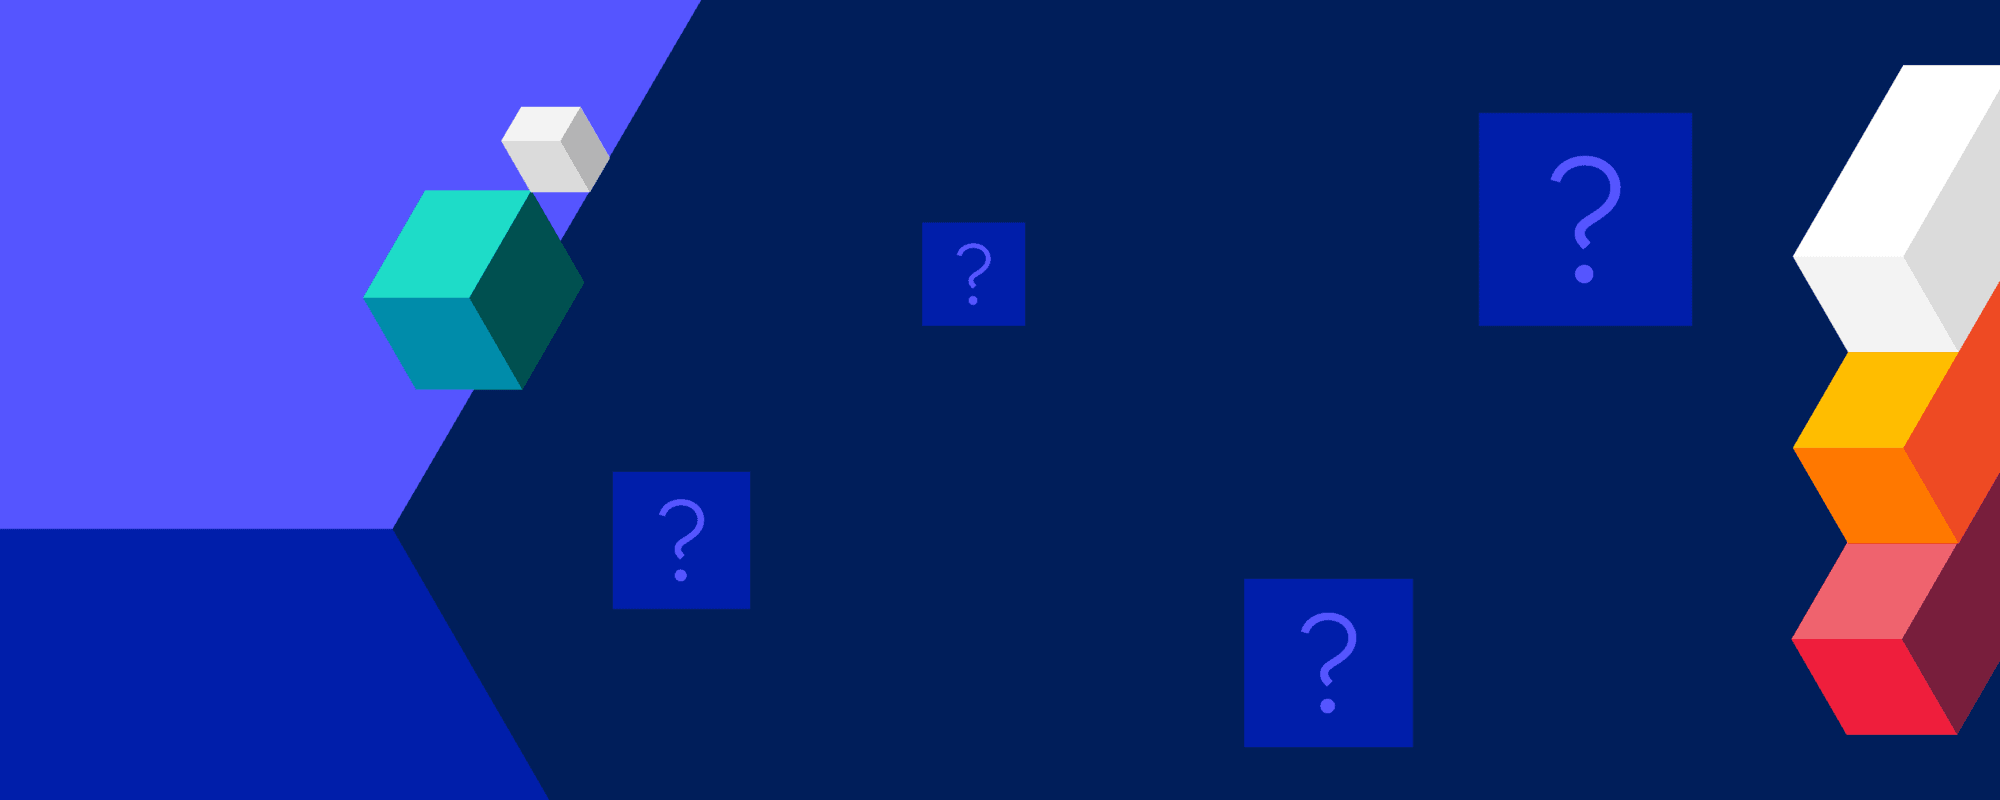 Dark Blue Background with block shapes and squares with question marks.